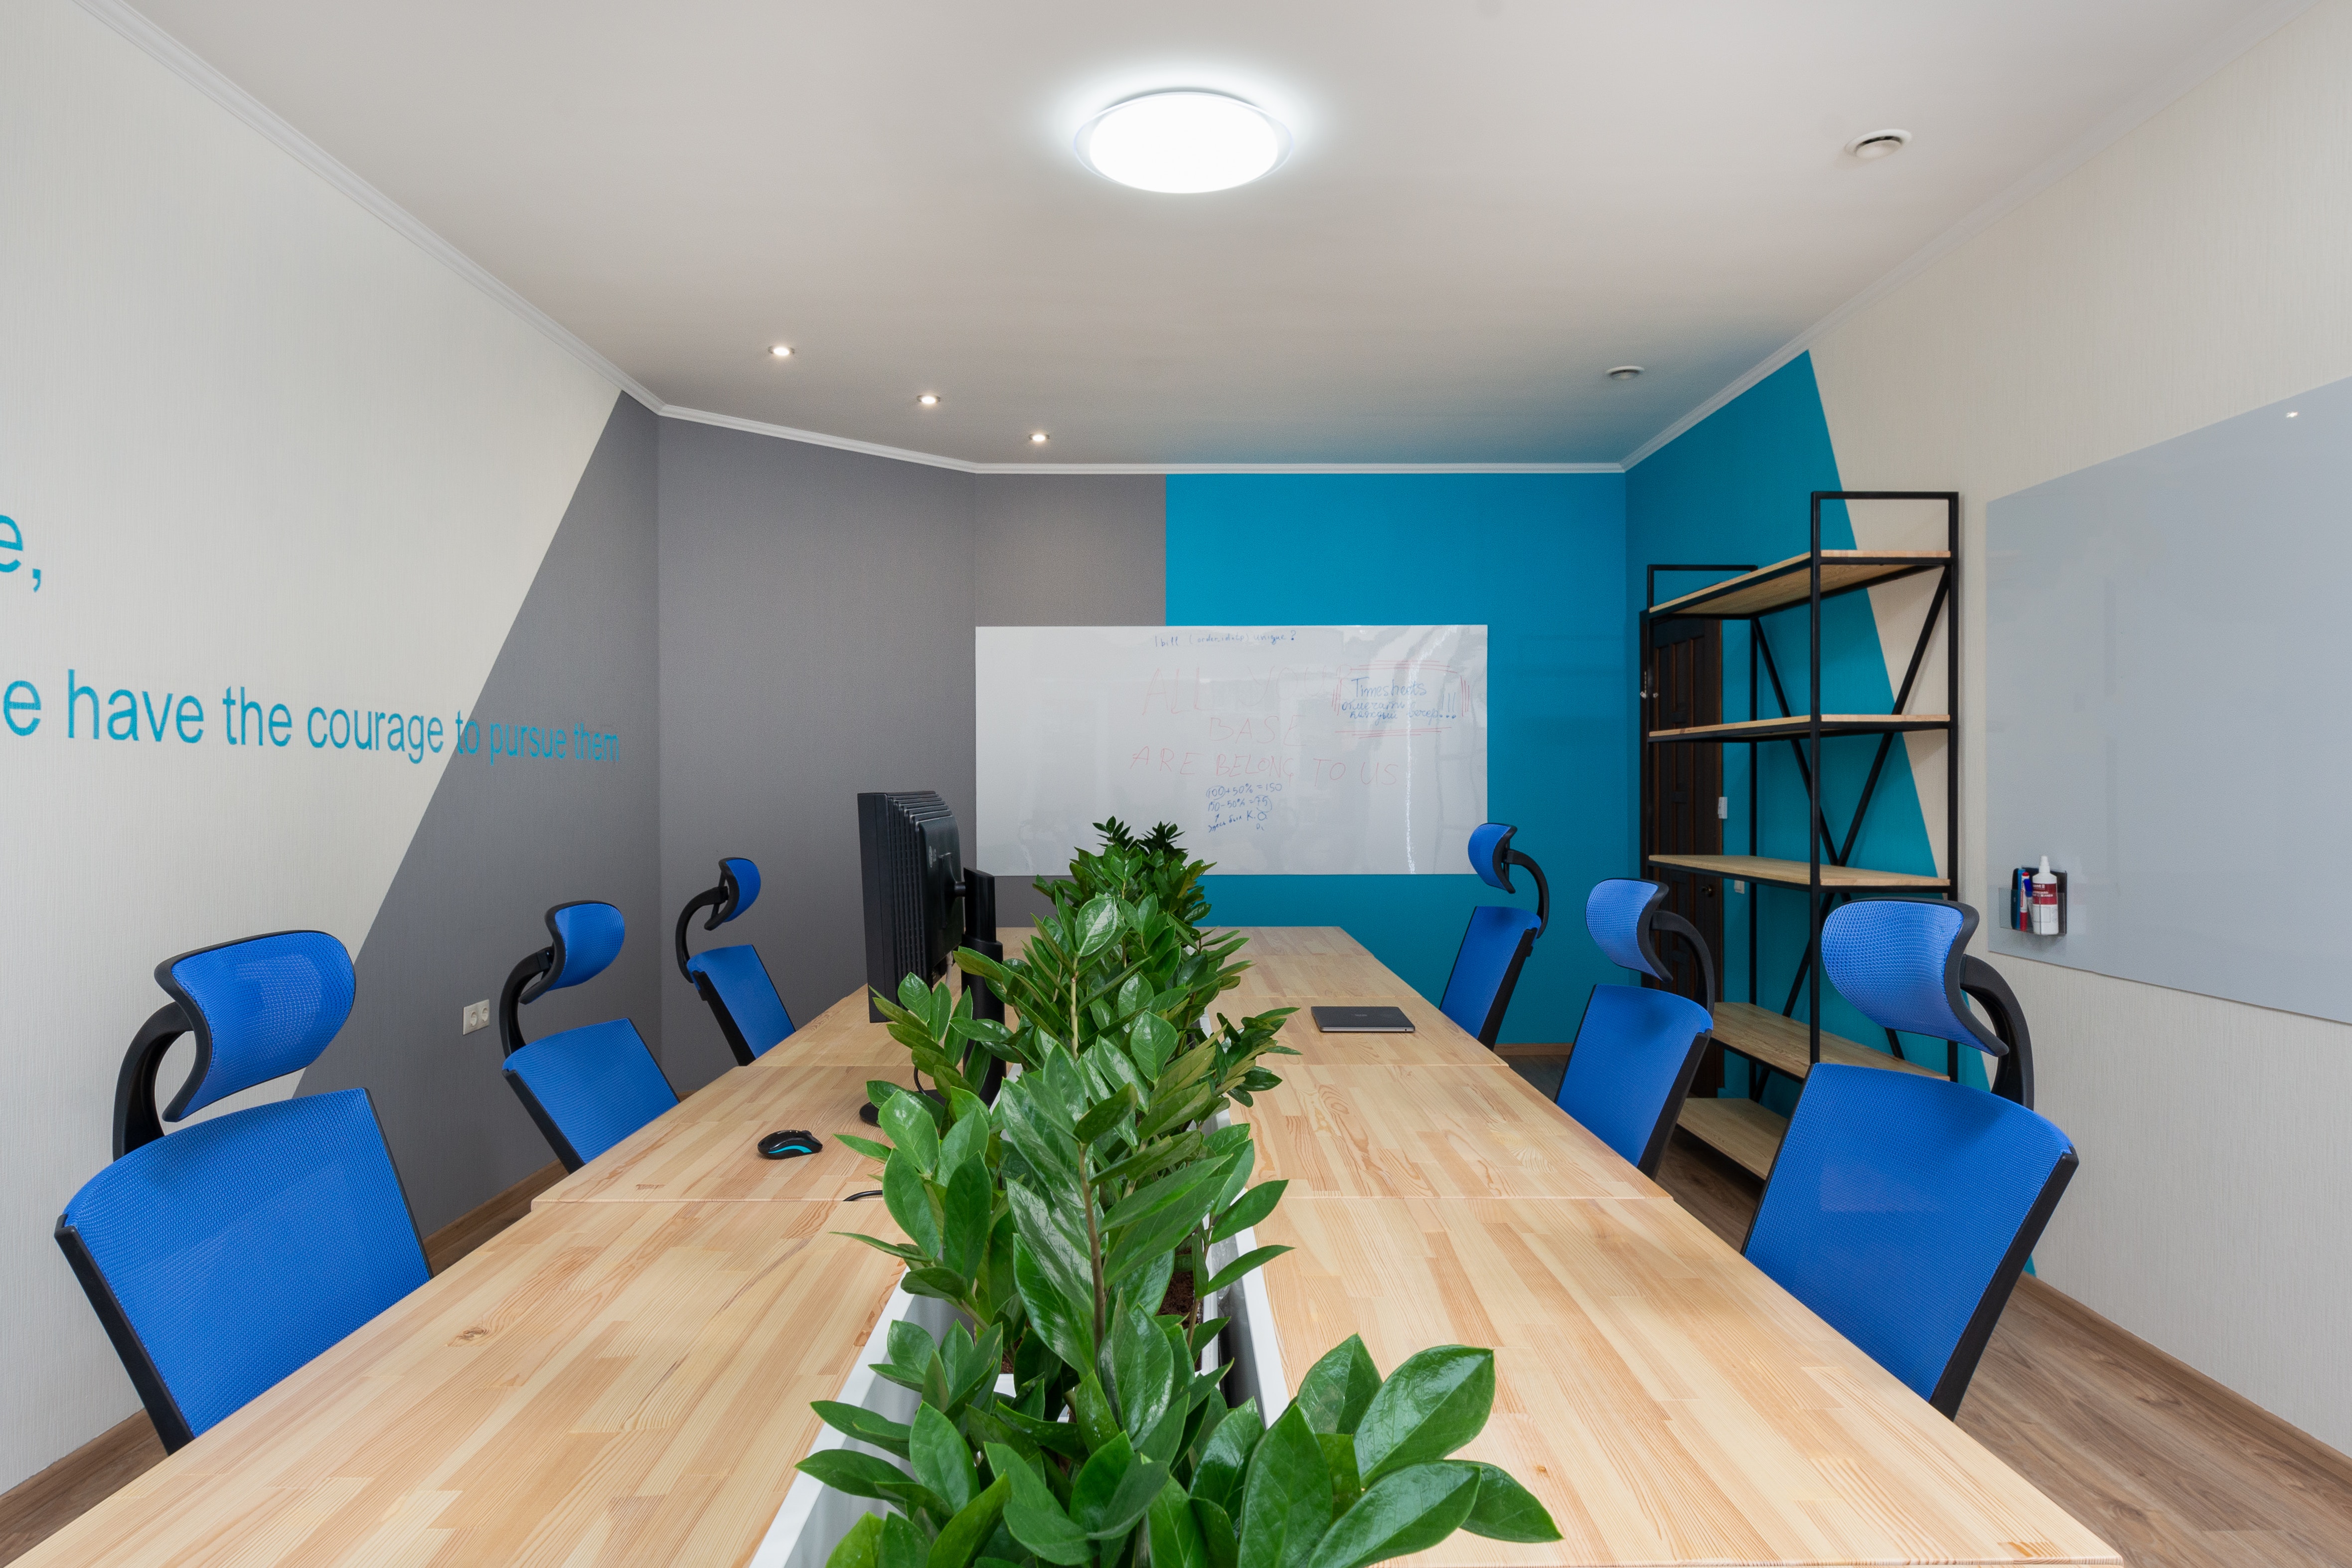 conference room with plants in the middle